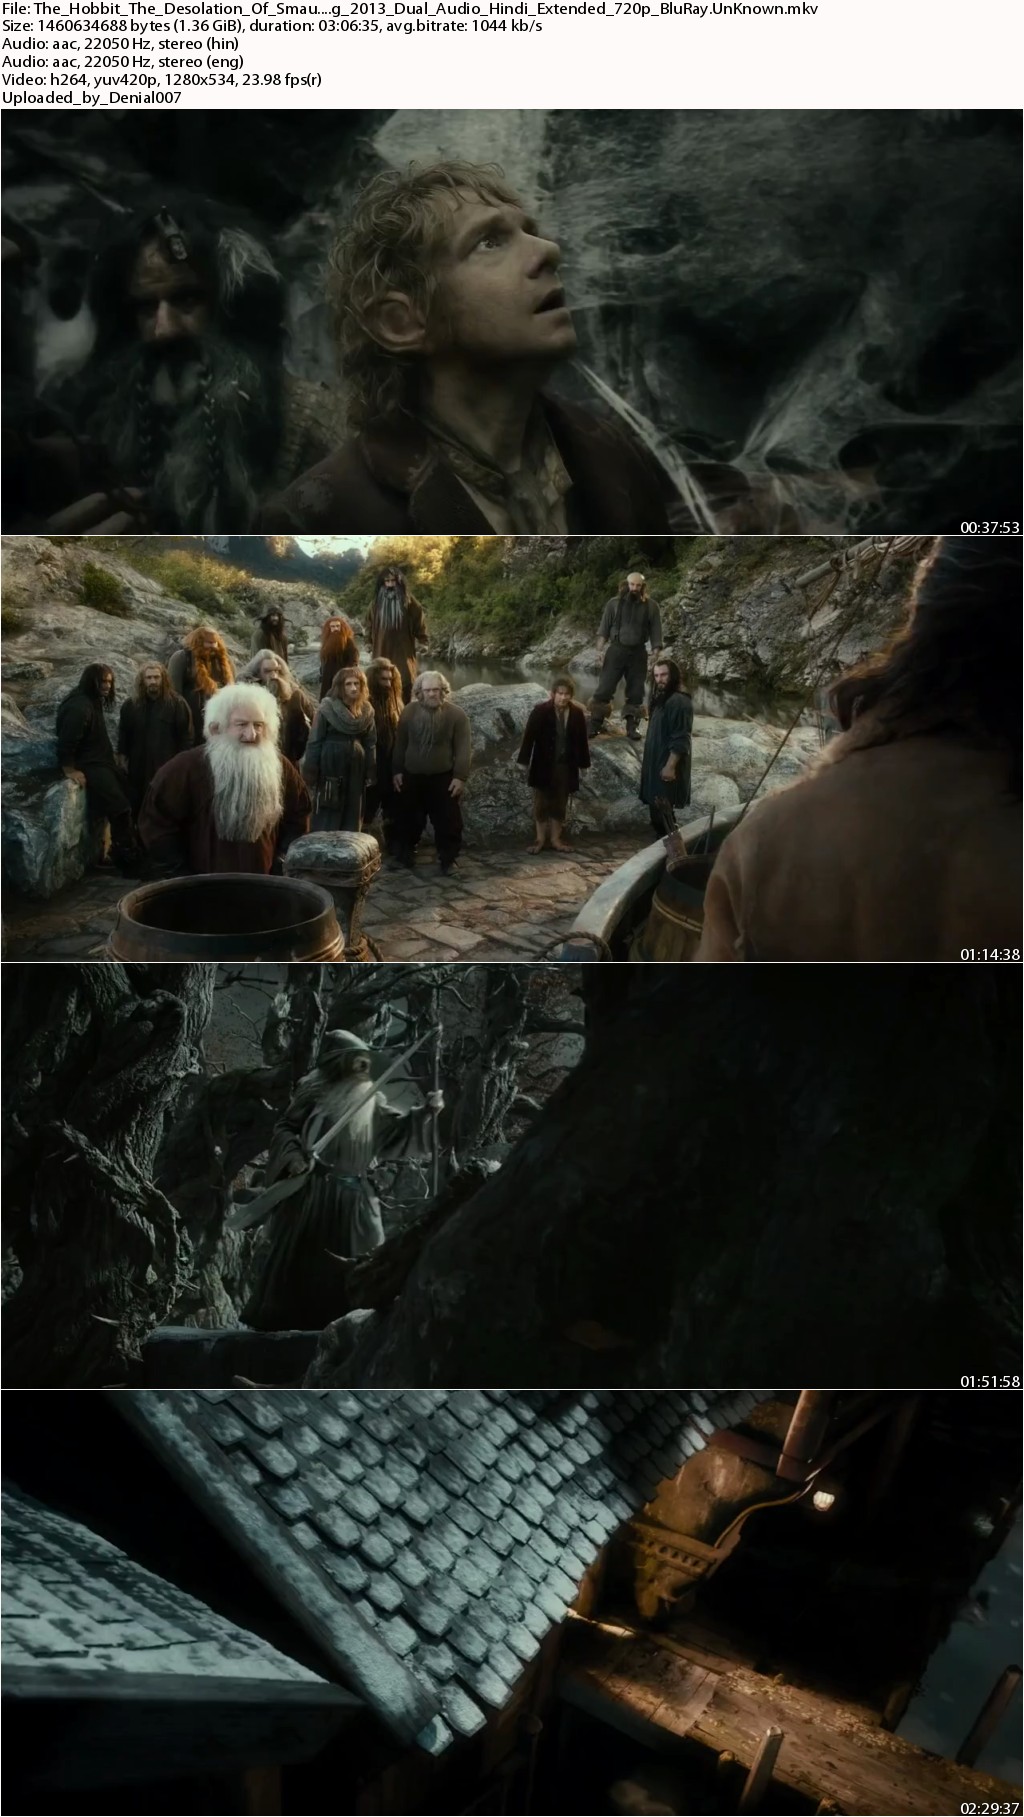 The Hobbit The Desolation Of Smaug (2013) Extended 720p BluRay Dual Audio - UnKnown